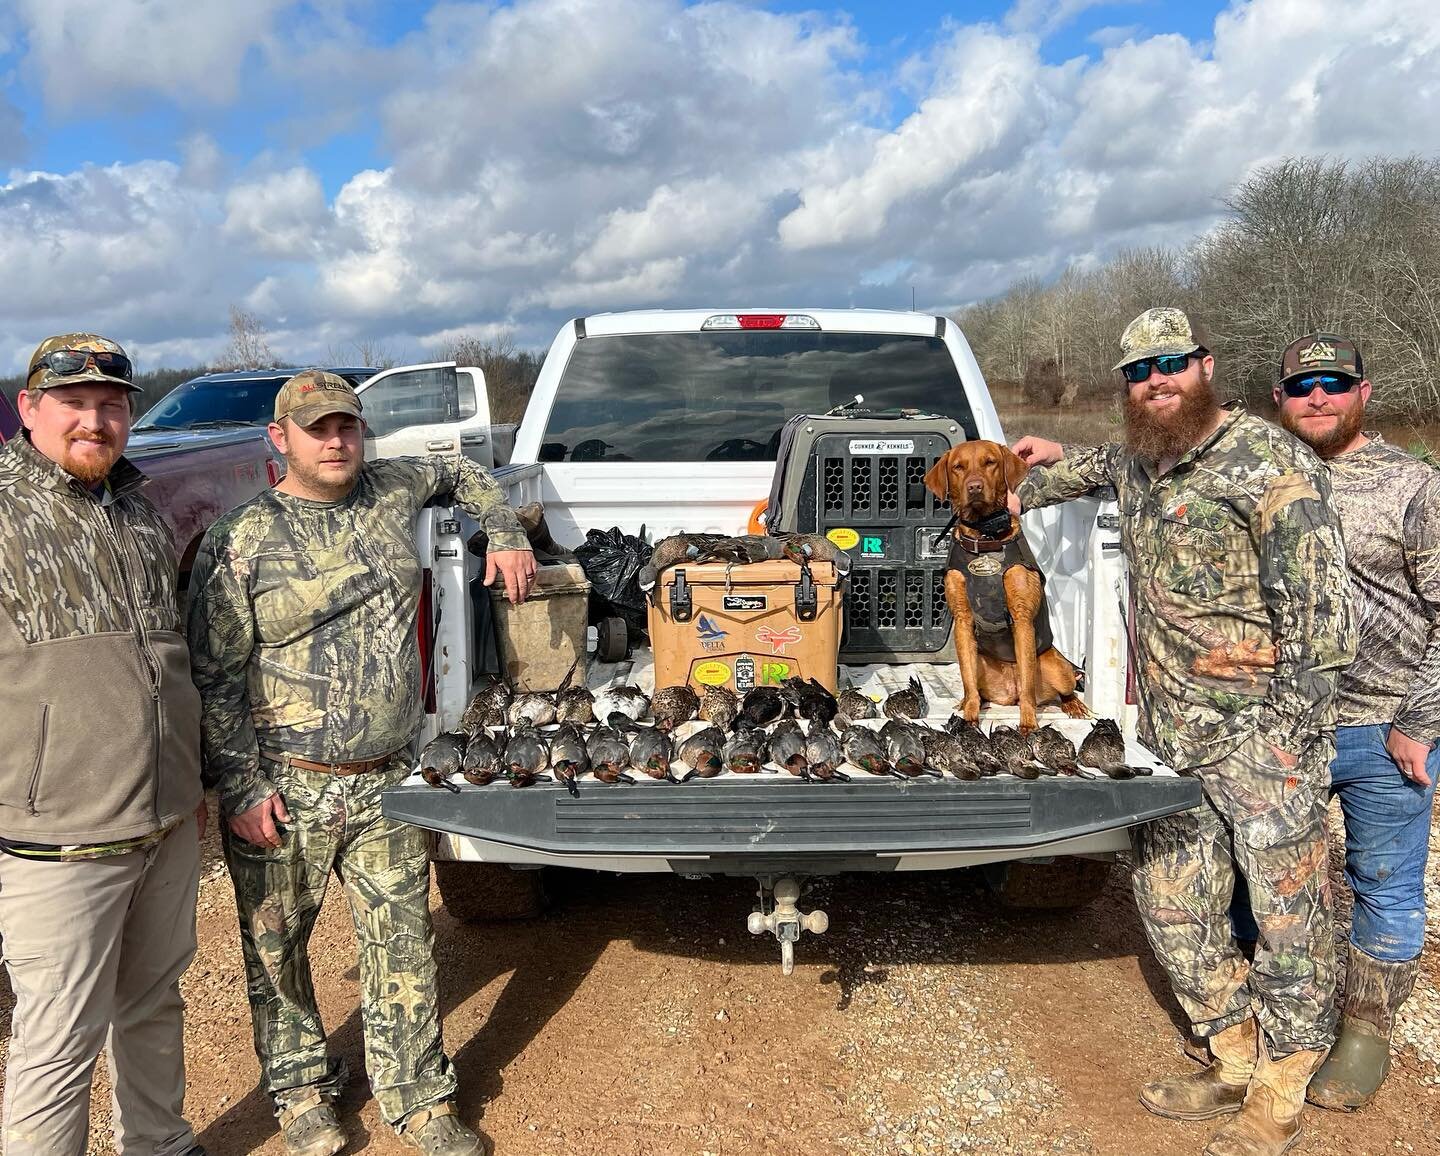 Still on fire! An we still have a good many dates open in January so call (318)-201-3474 to book your hunt. You don&rsquo;t want to miss out of the action! #robrobertscustomgunworks #singletongamecalls #drakewaterfowl #swampgear #migraammo #mojooutdo